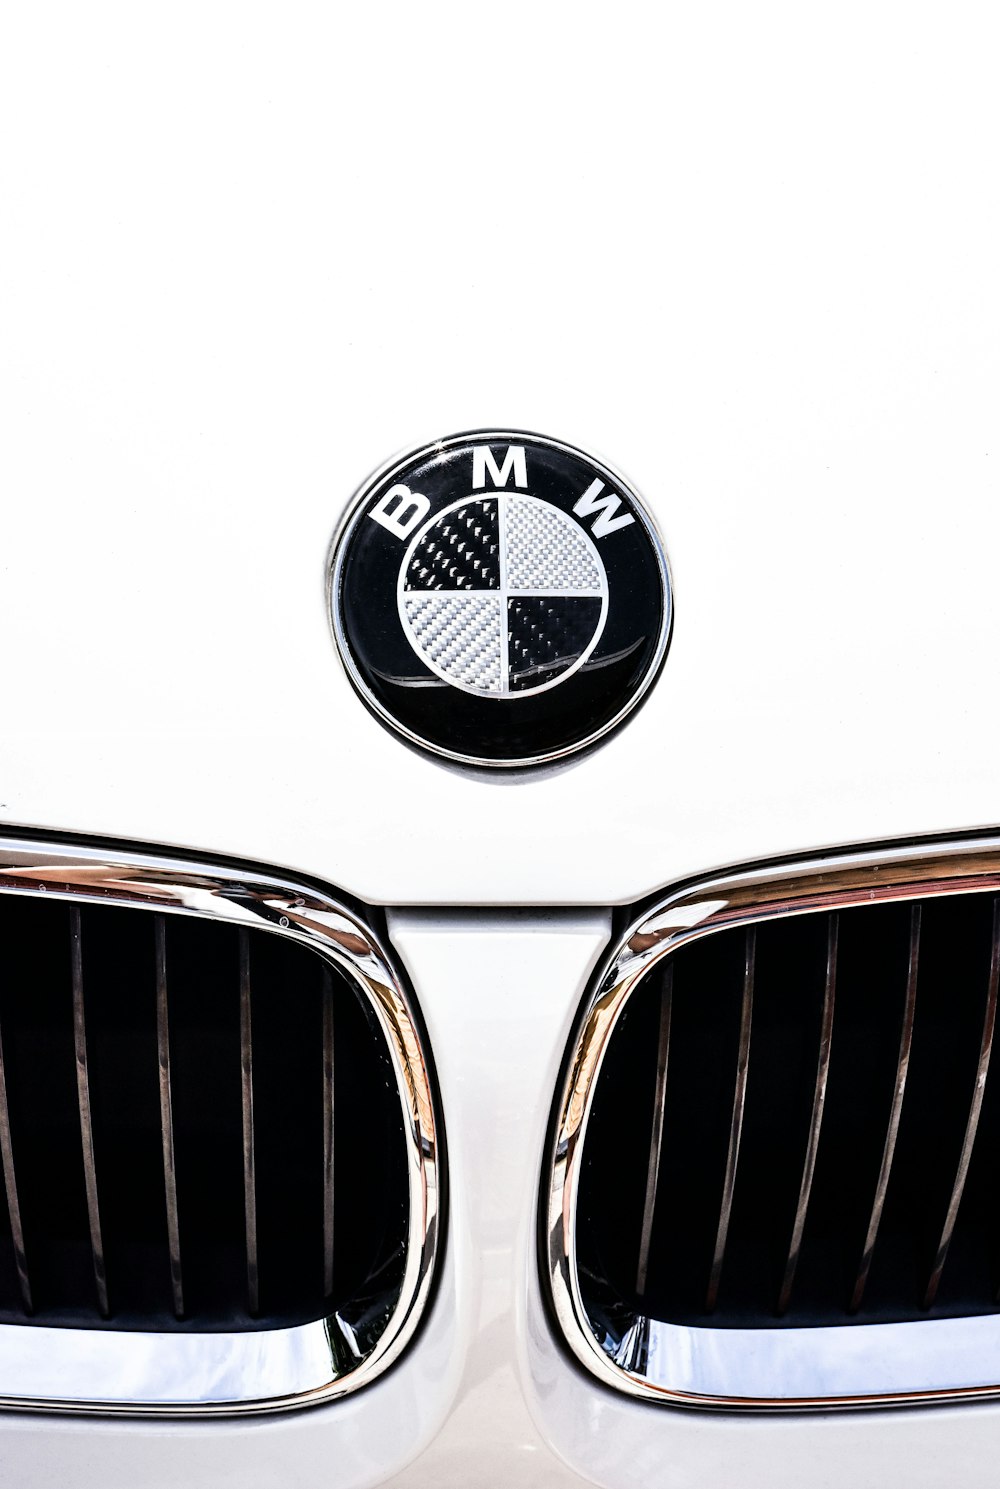 close-up photography of white BMW vehicle